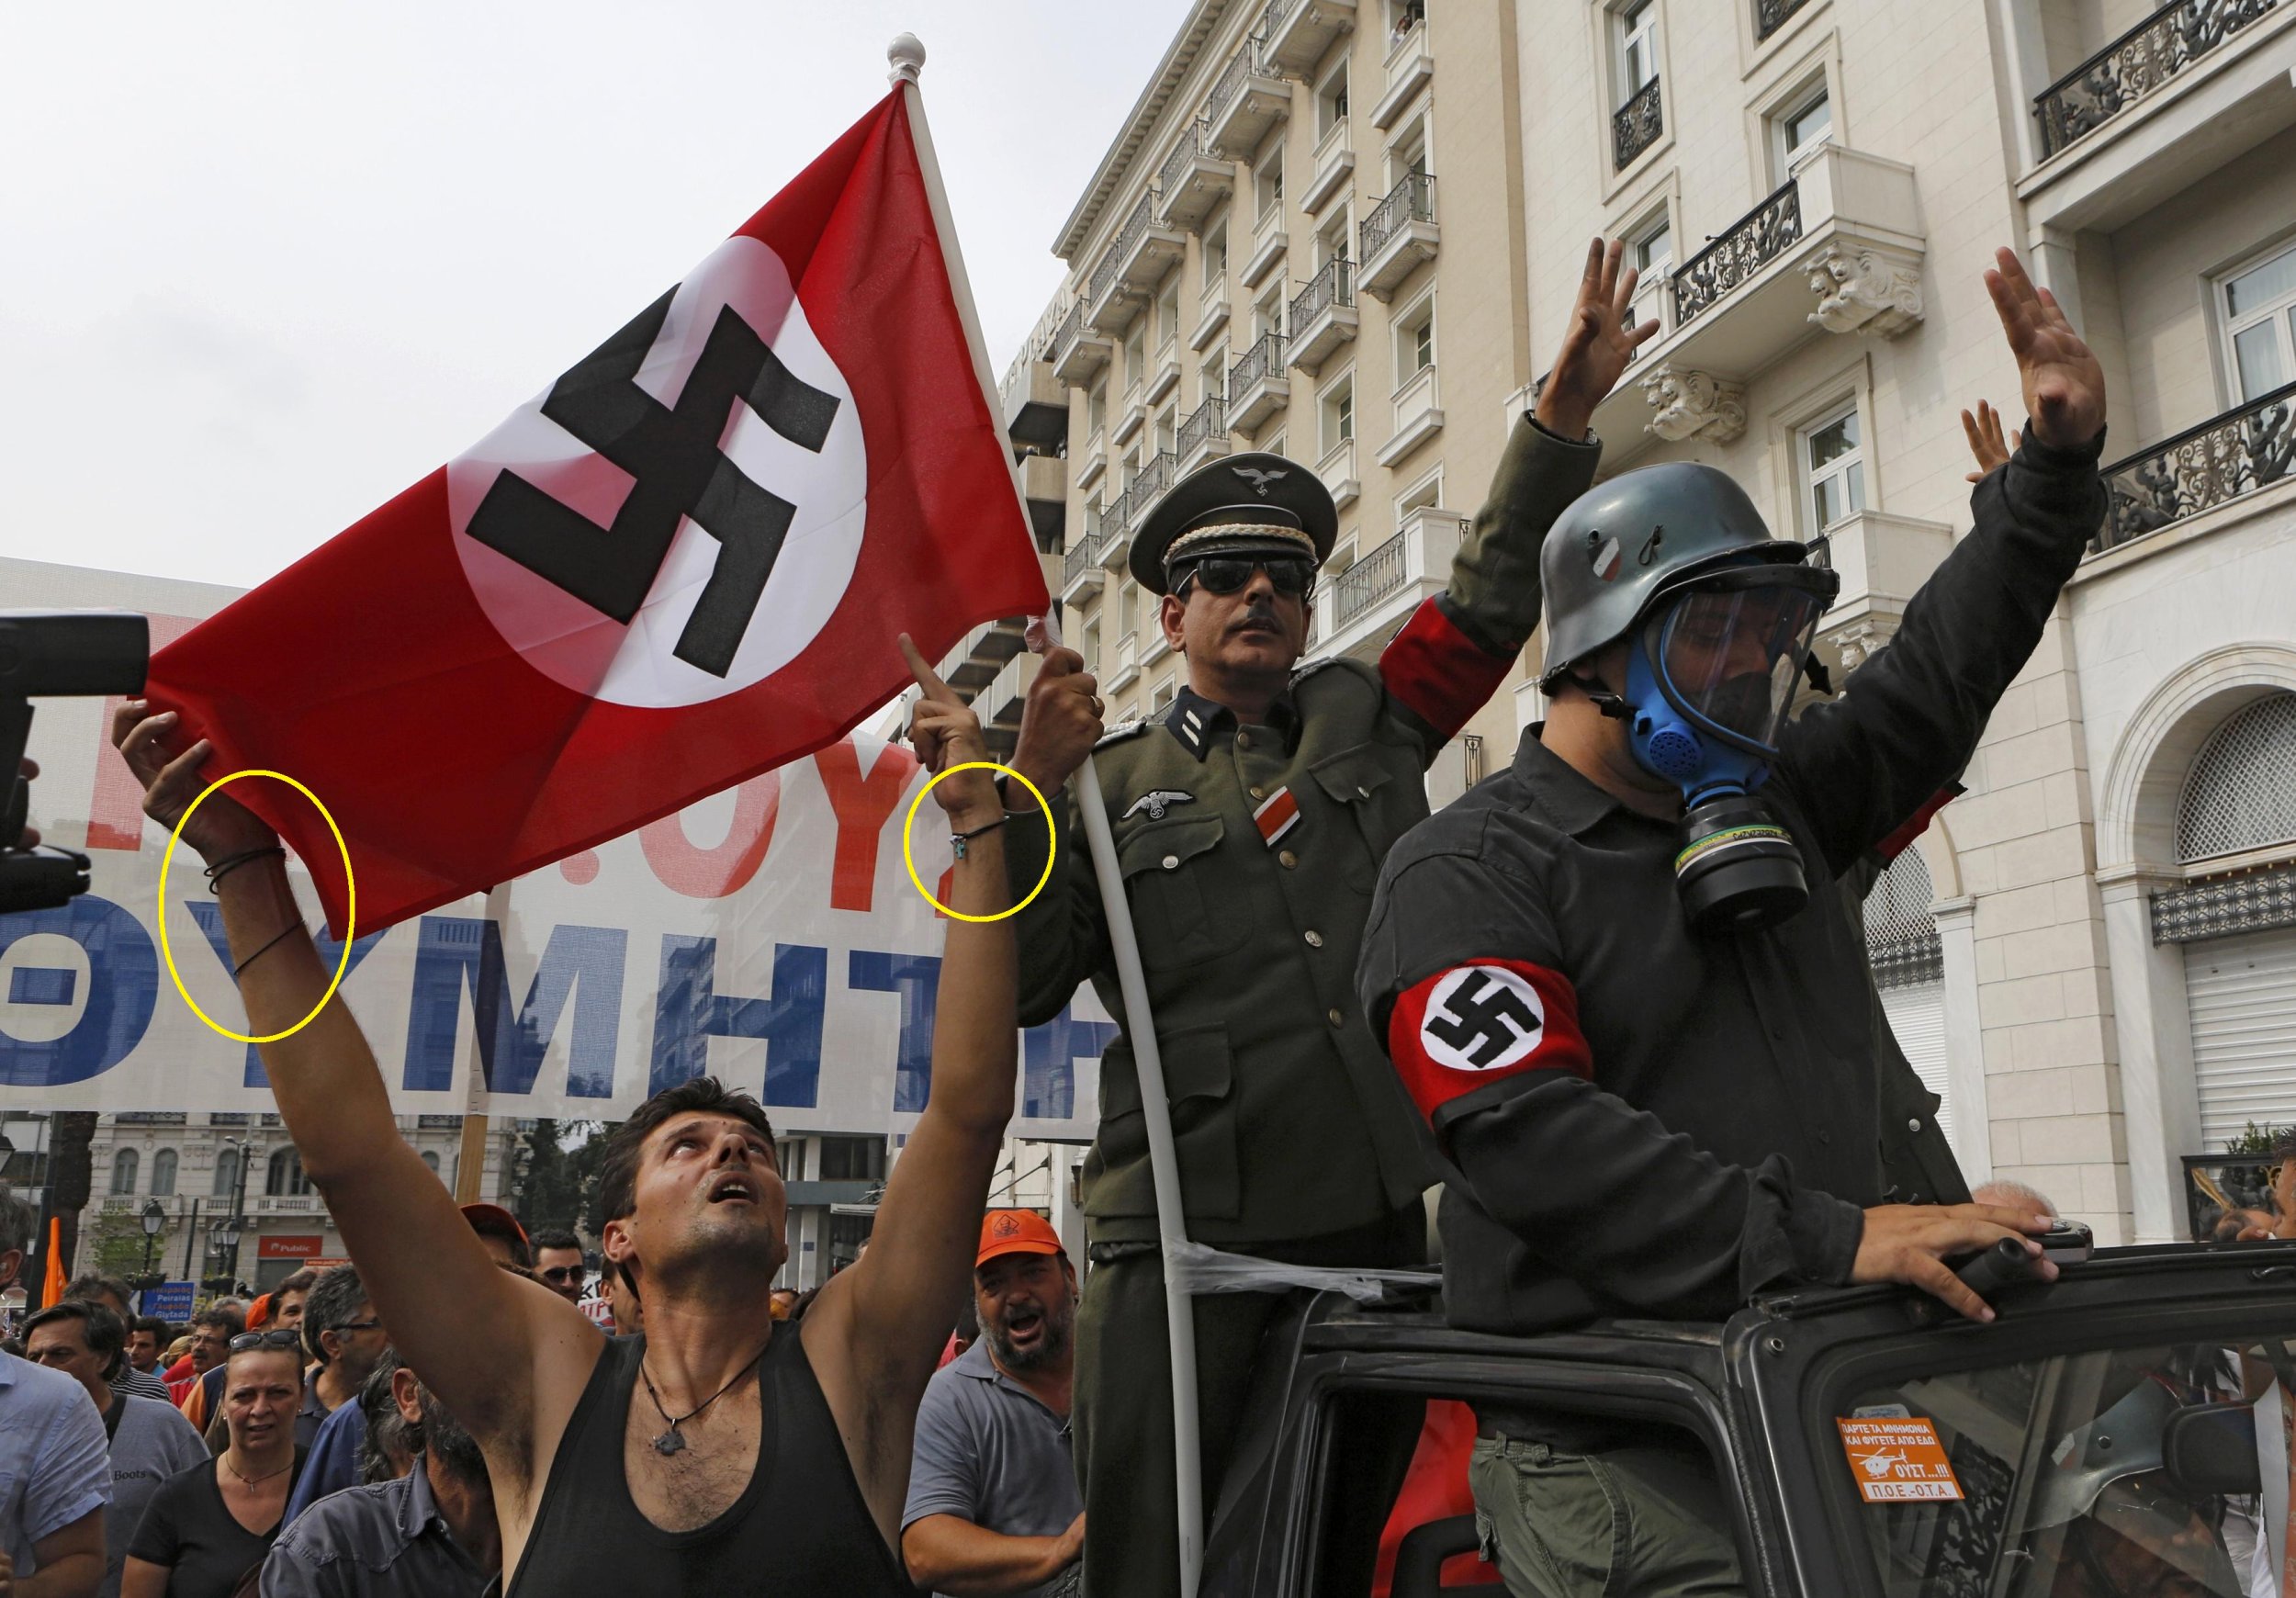 Demonstrators mock Angela Merkel during the German chancellors visit to Athens on October 9. A man holding up a Nazi flag shows he came to the protest in style.